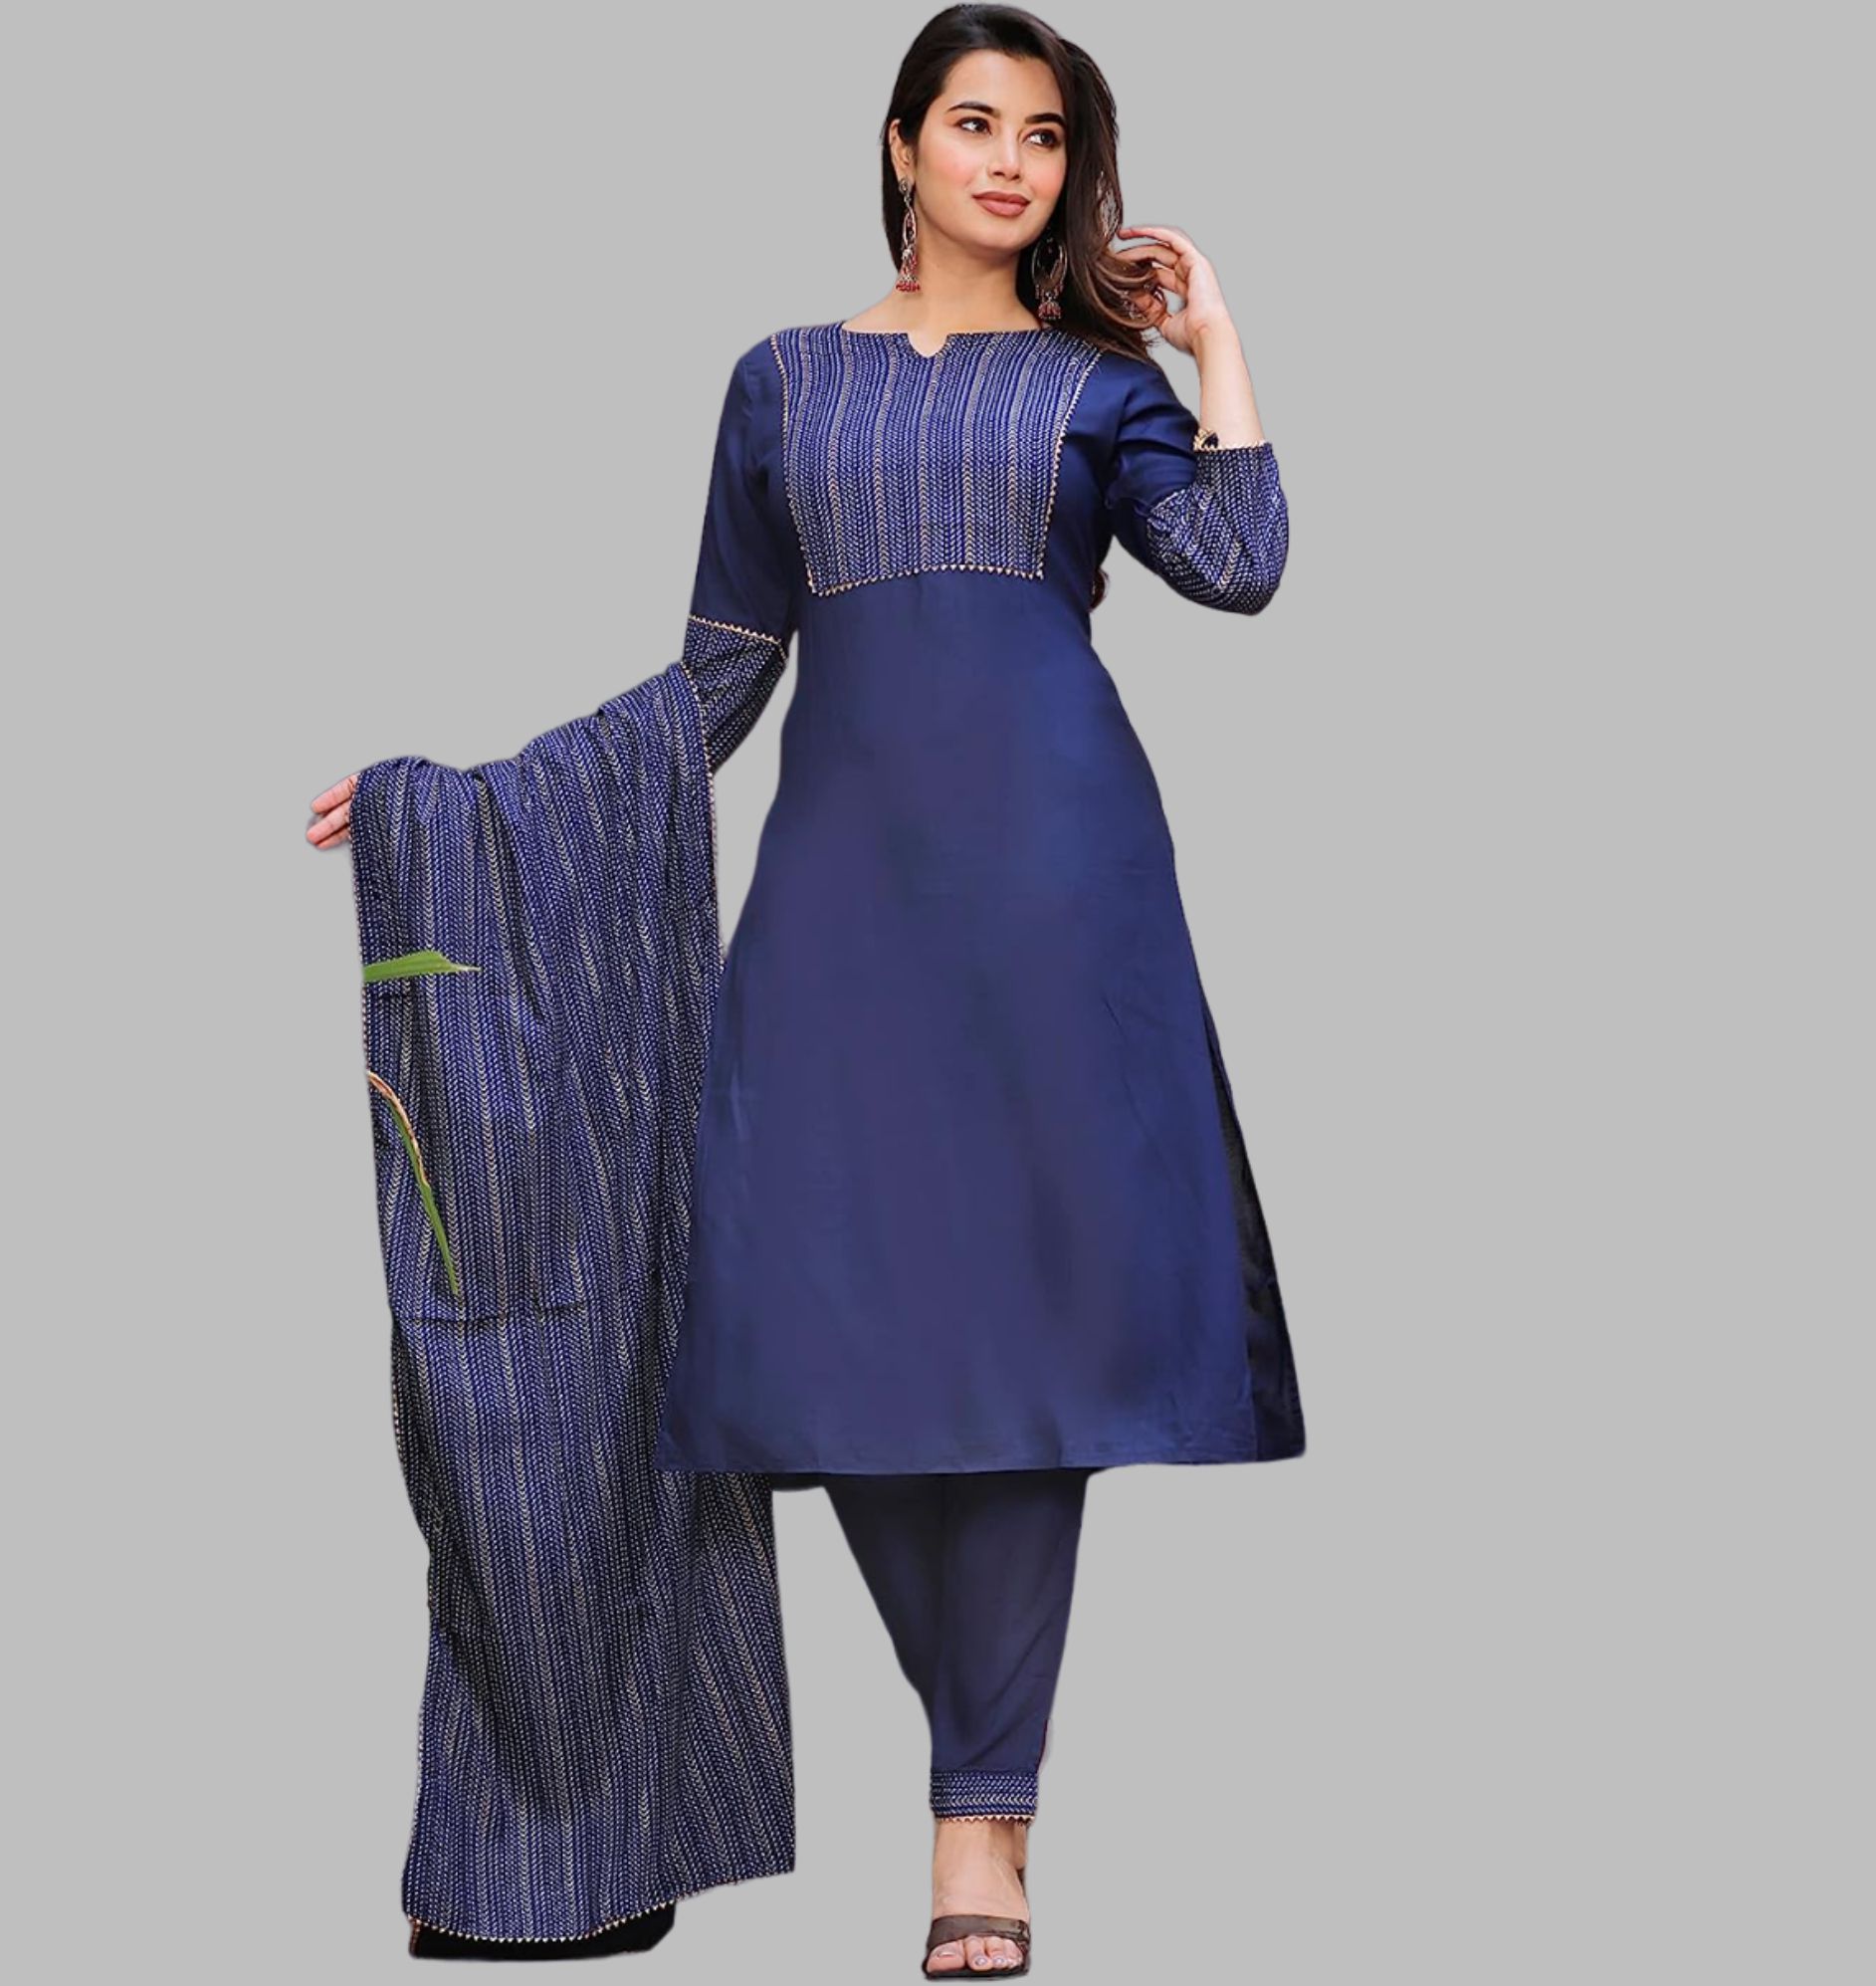     			G4Girl - Navy Blue Straight Rayon Women's Stitched Salwar Suit ( Pack of 1 )